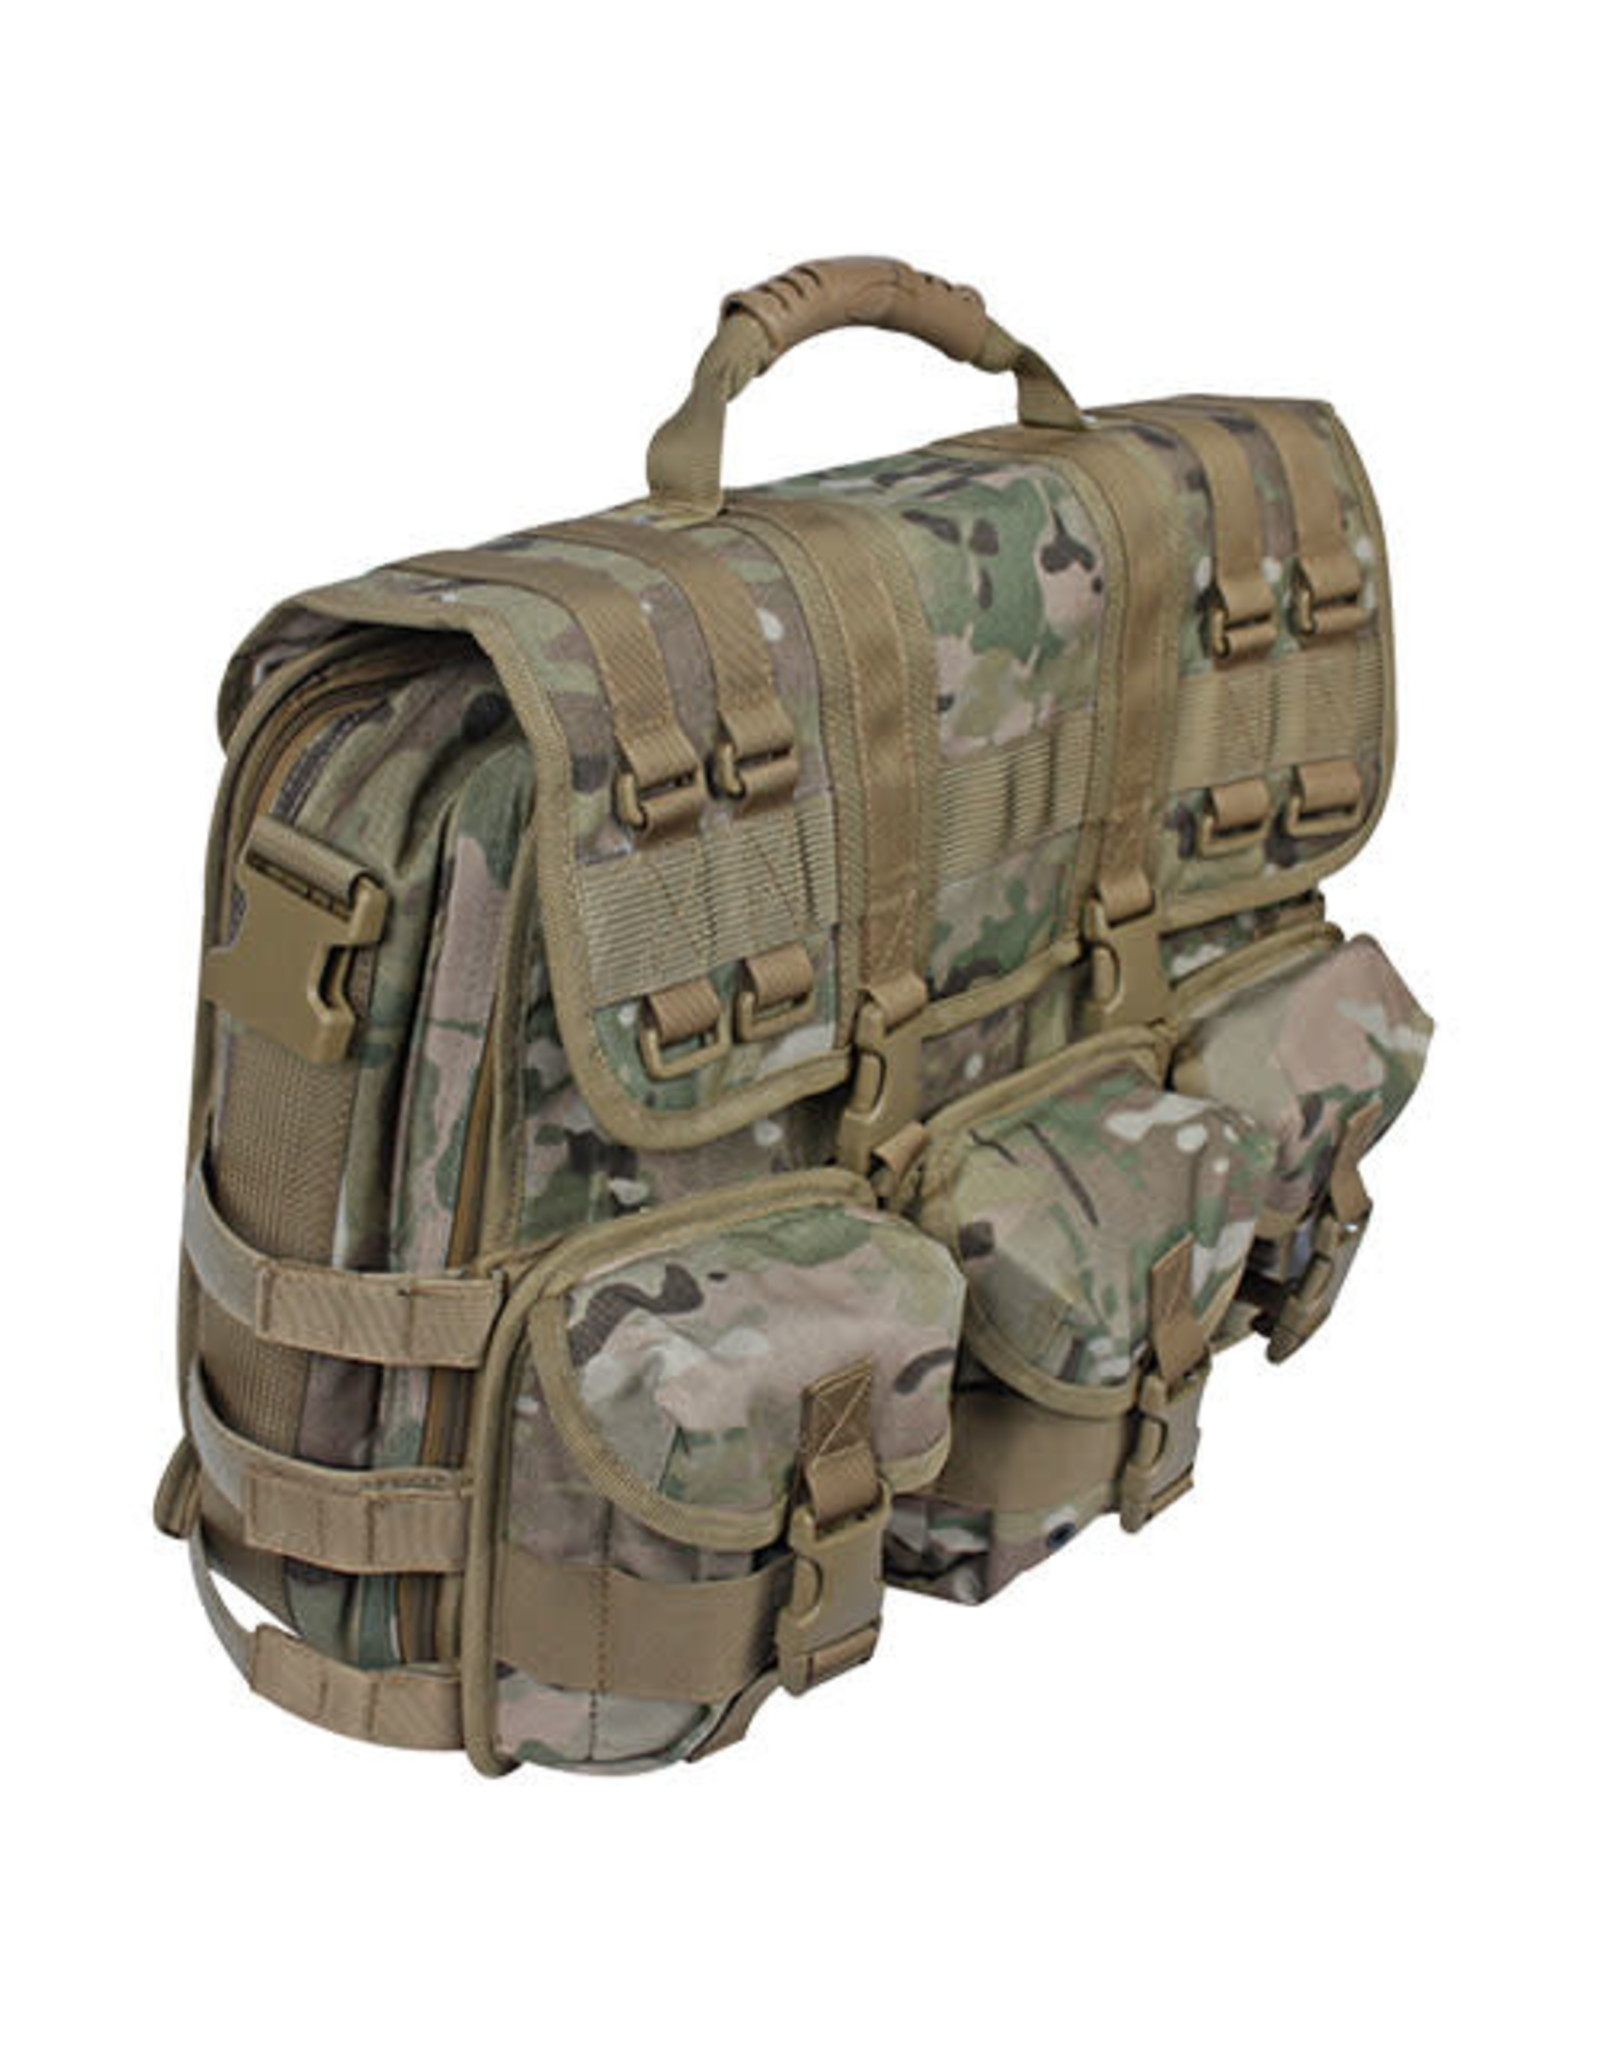 Tactical Field Briefcase